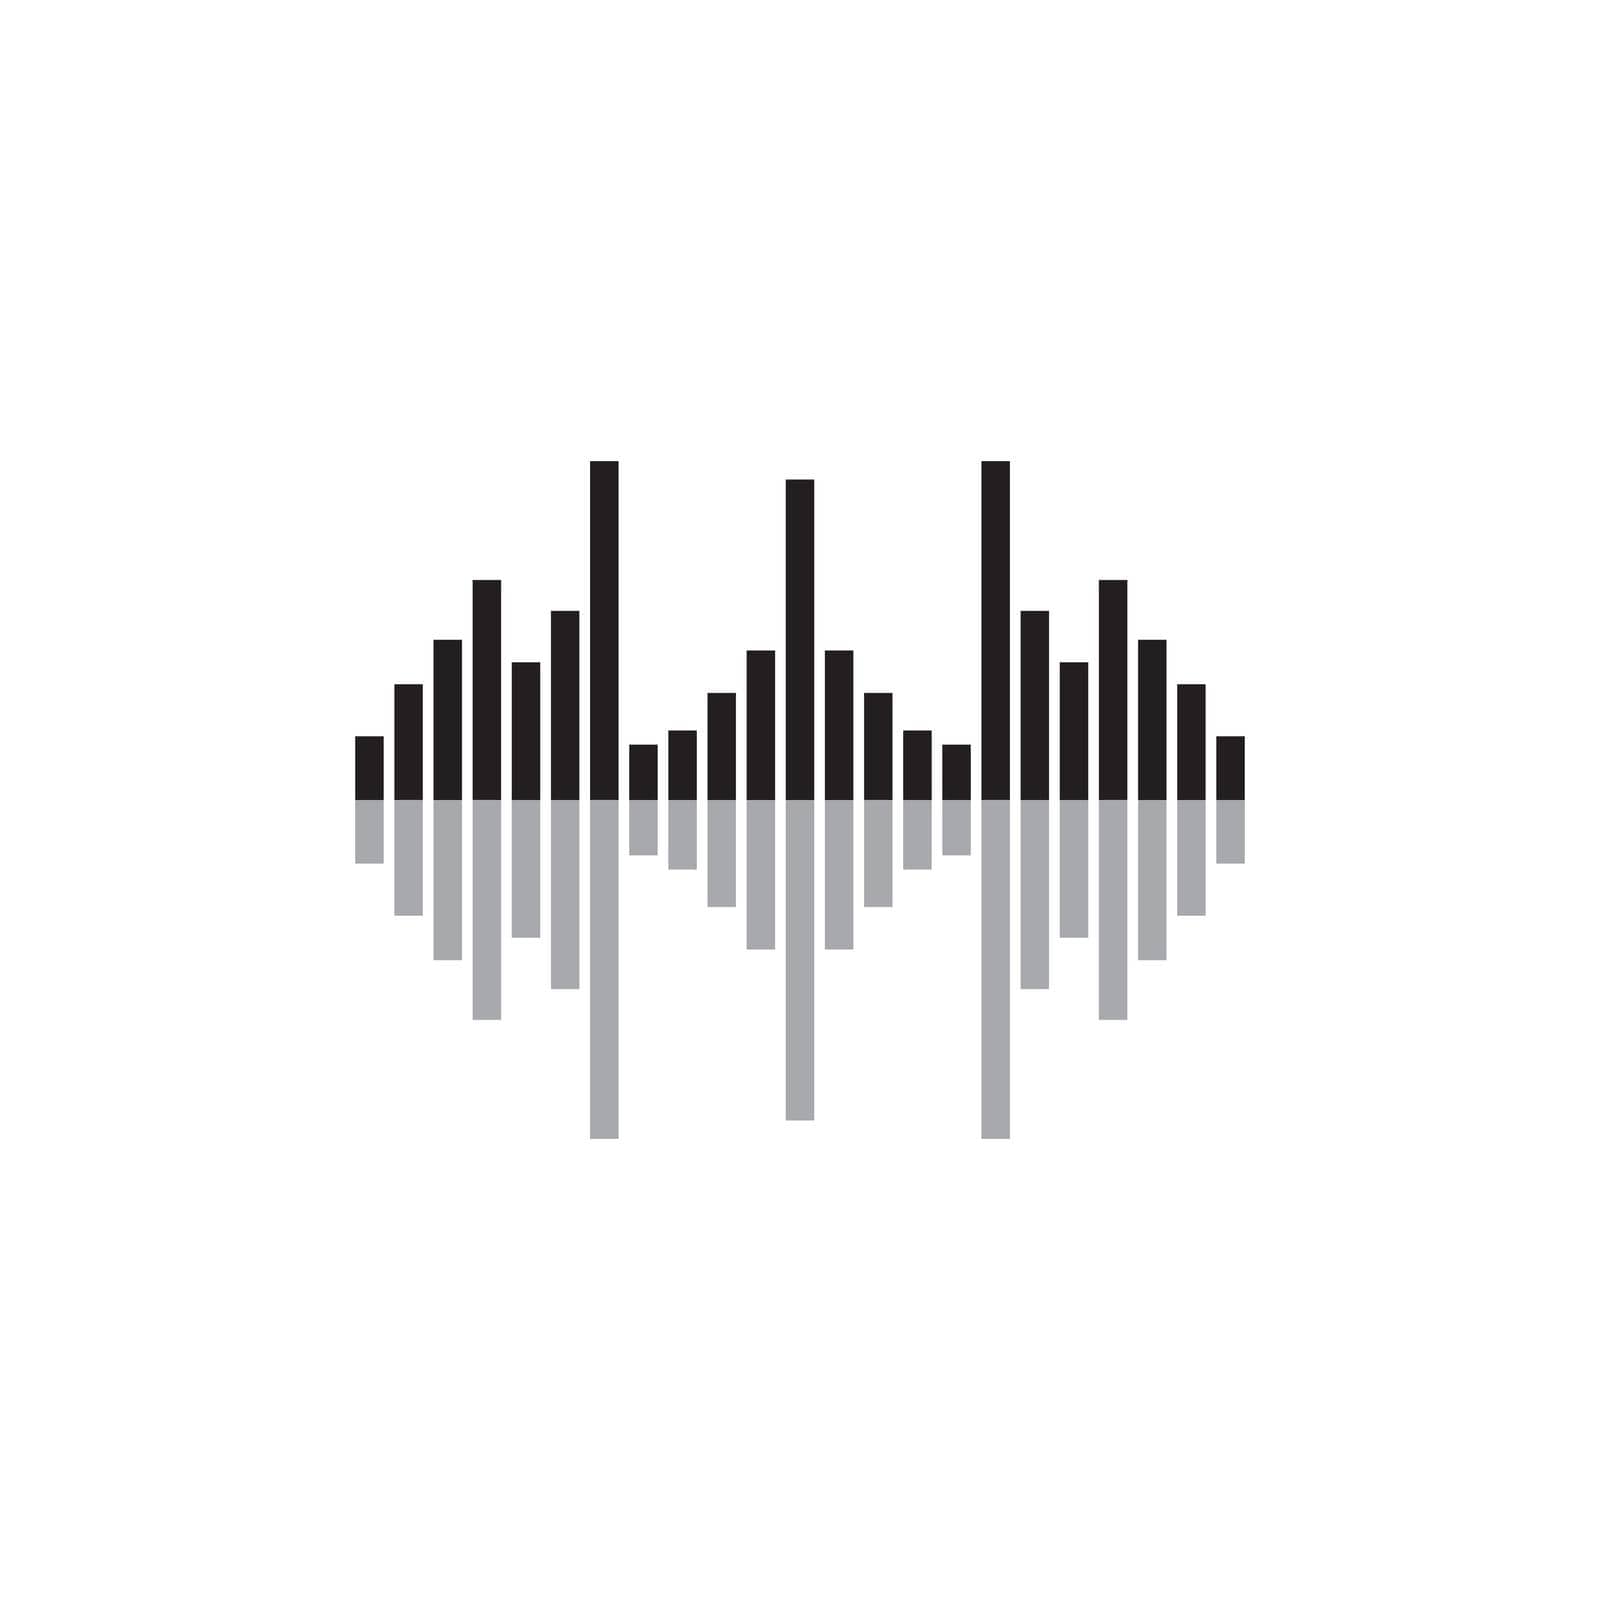 Sound waves vector illustration by Mrsongrphc